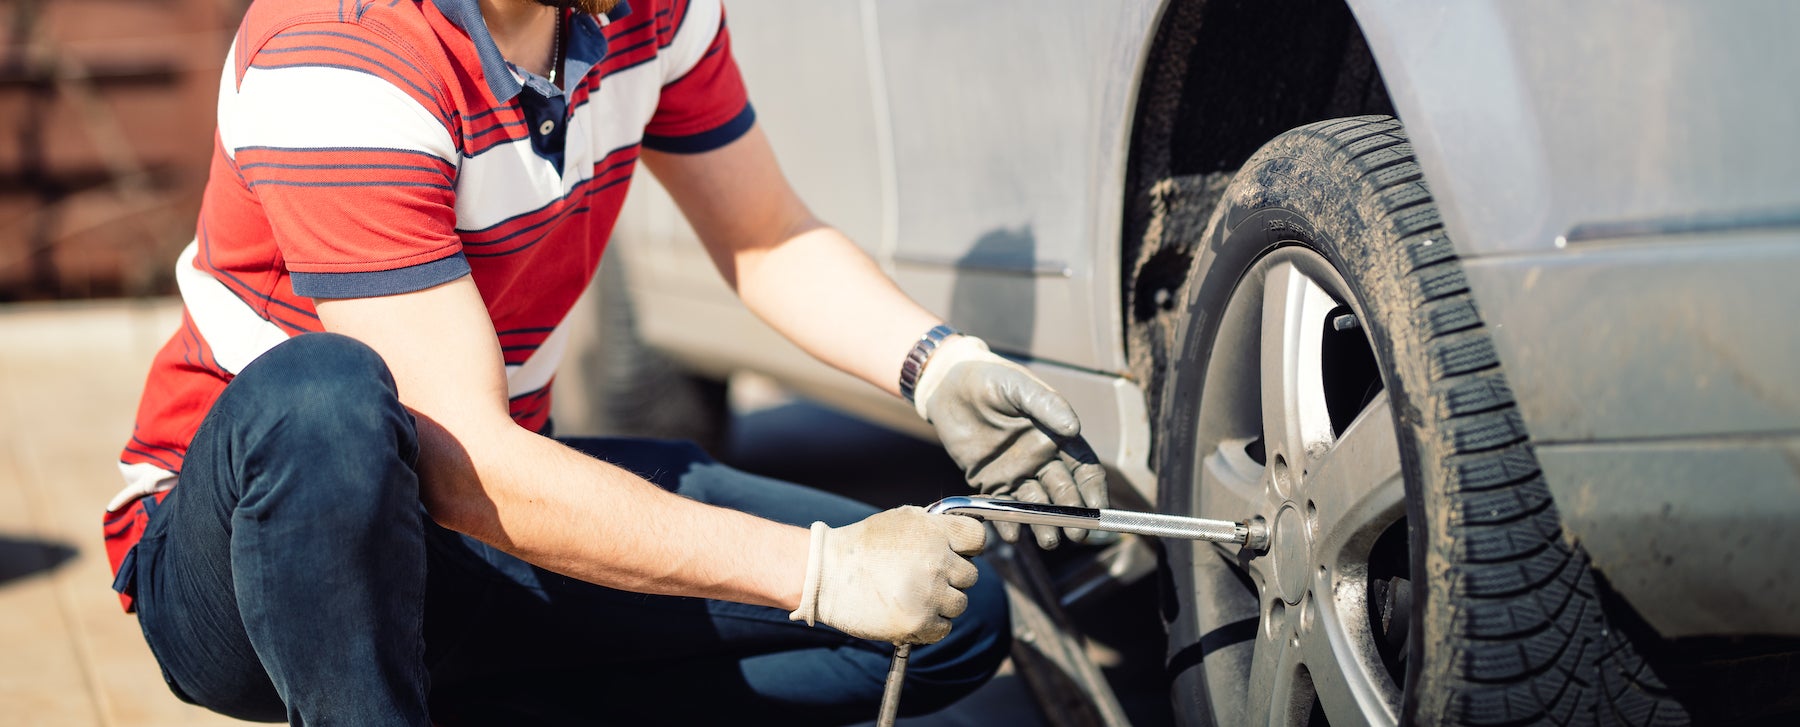 How to change a tire step-by-step guide at Fiore Toyota in Hollidaysburg | man changing car tire